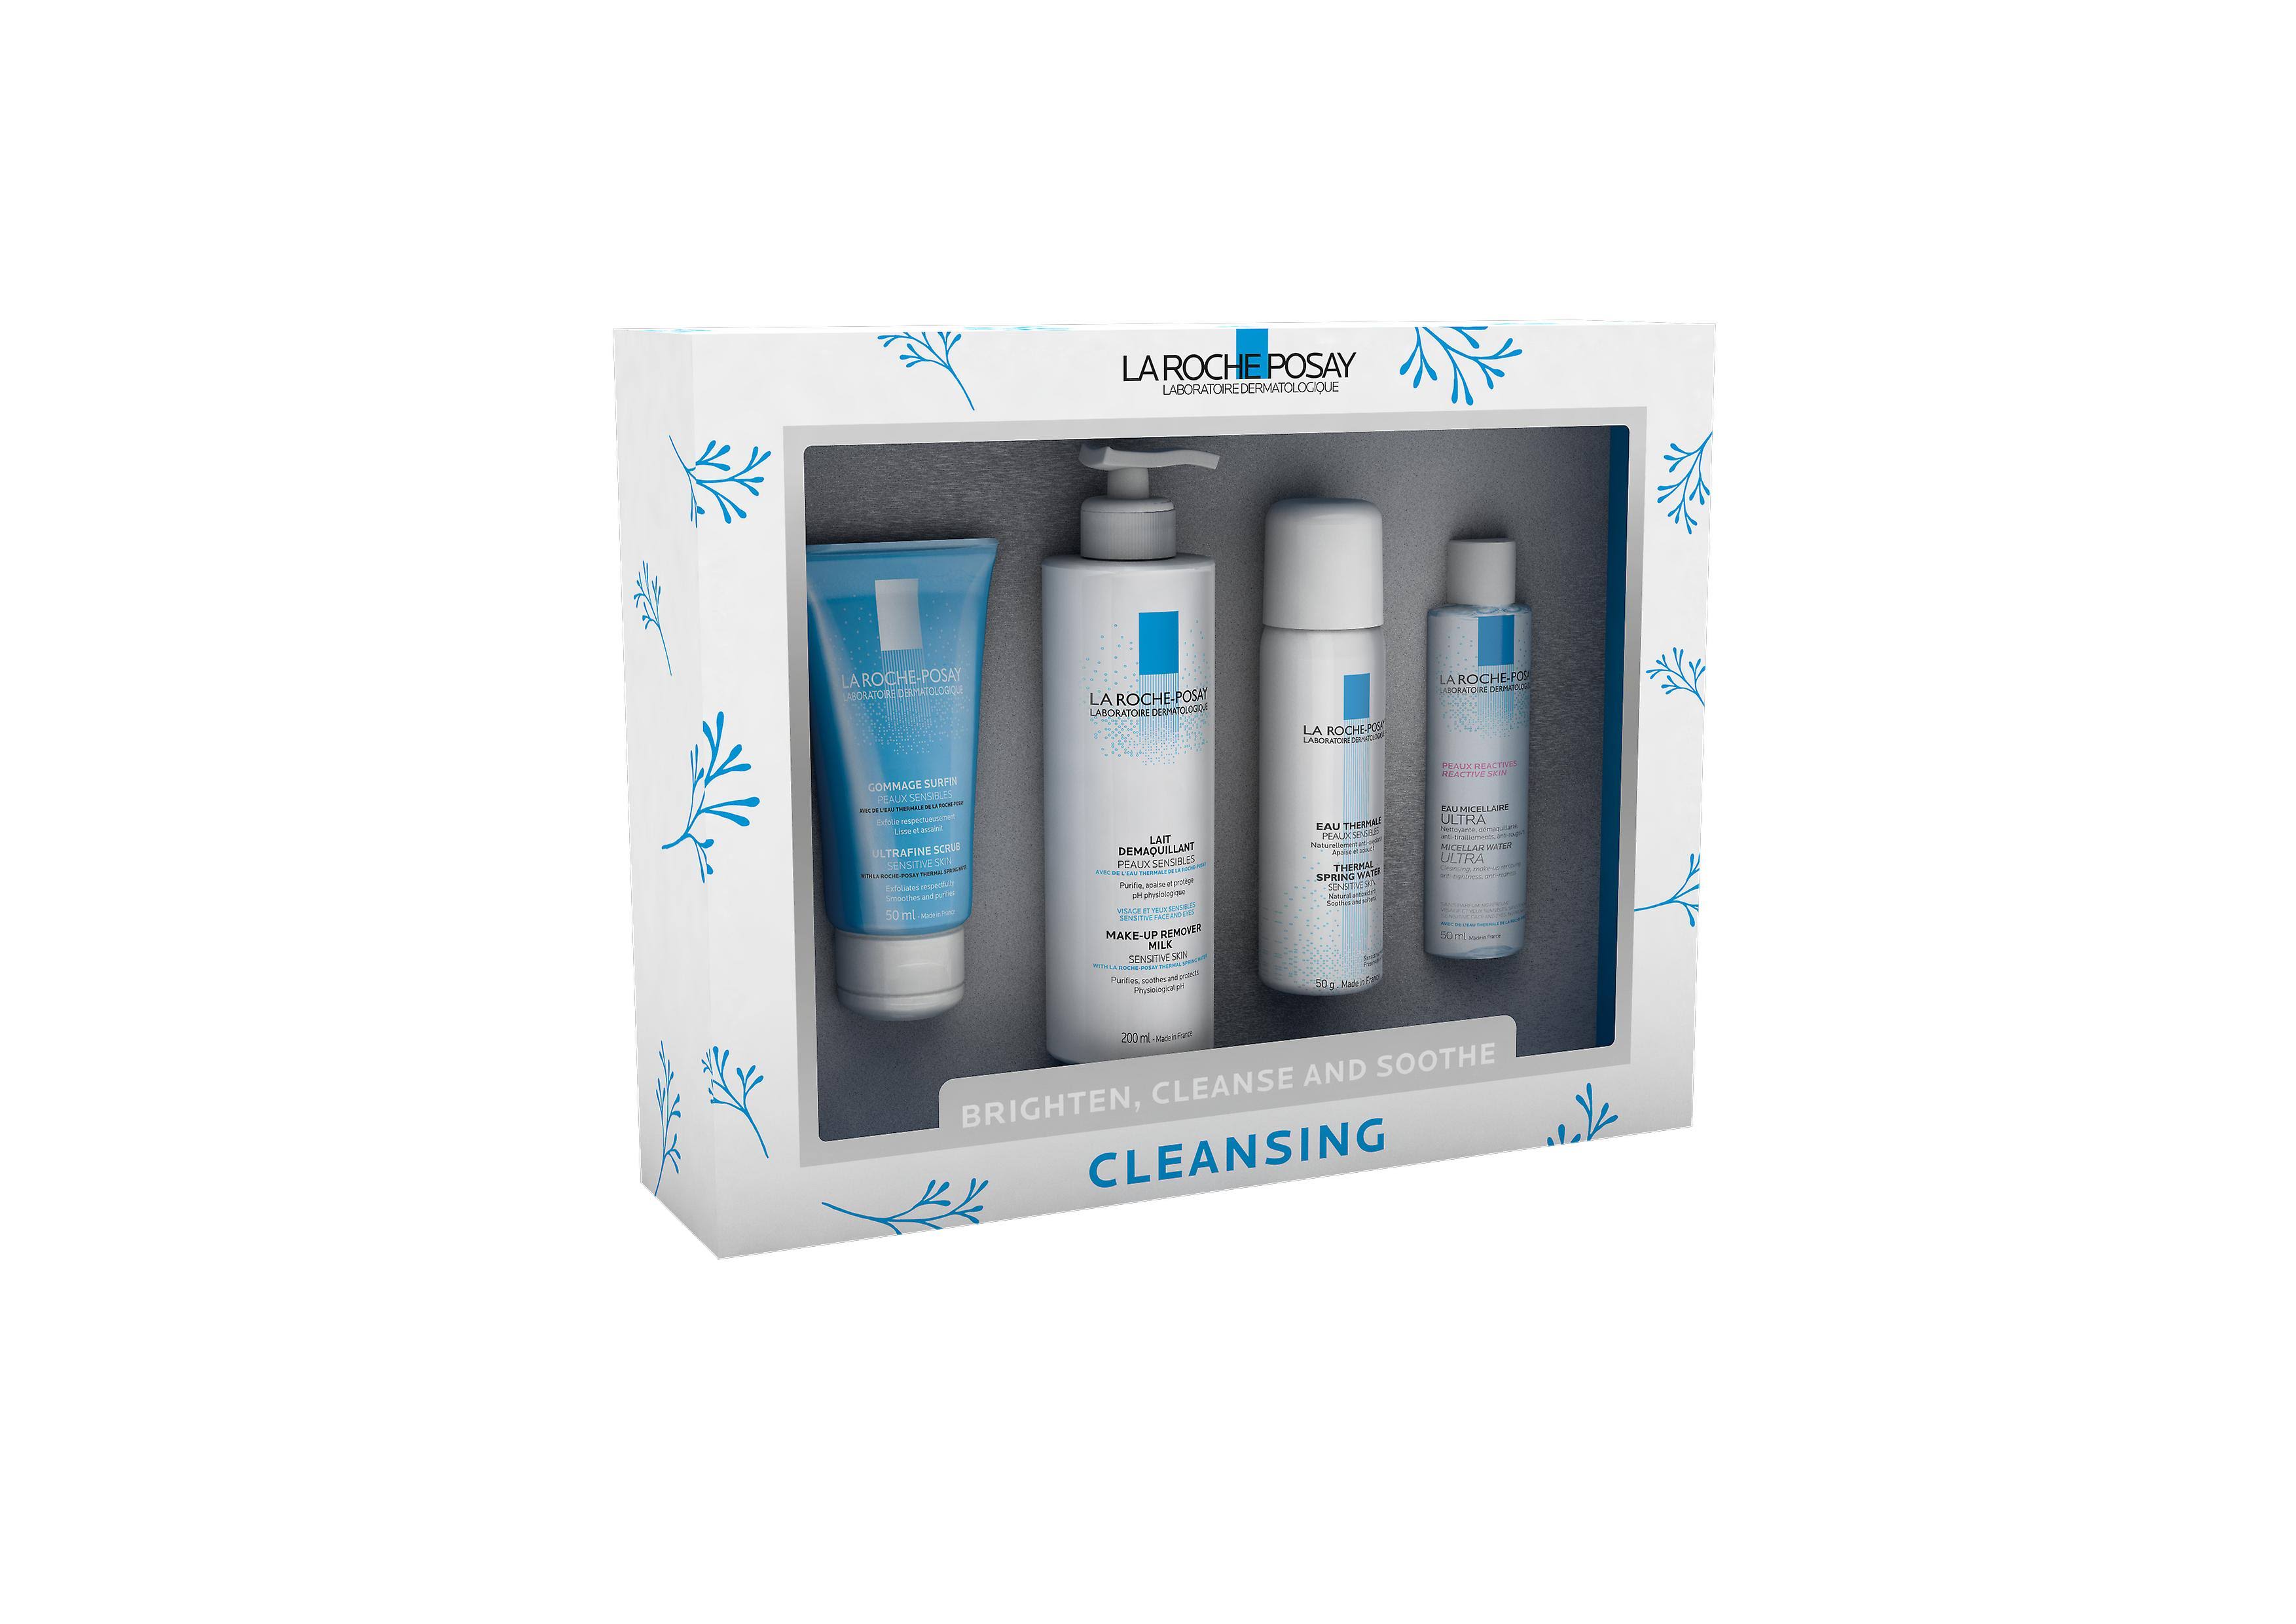 La Roche-Posay Cleansing - Brighten, Cleanse & Soothe Set